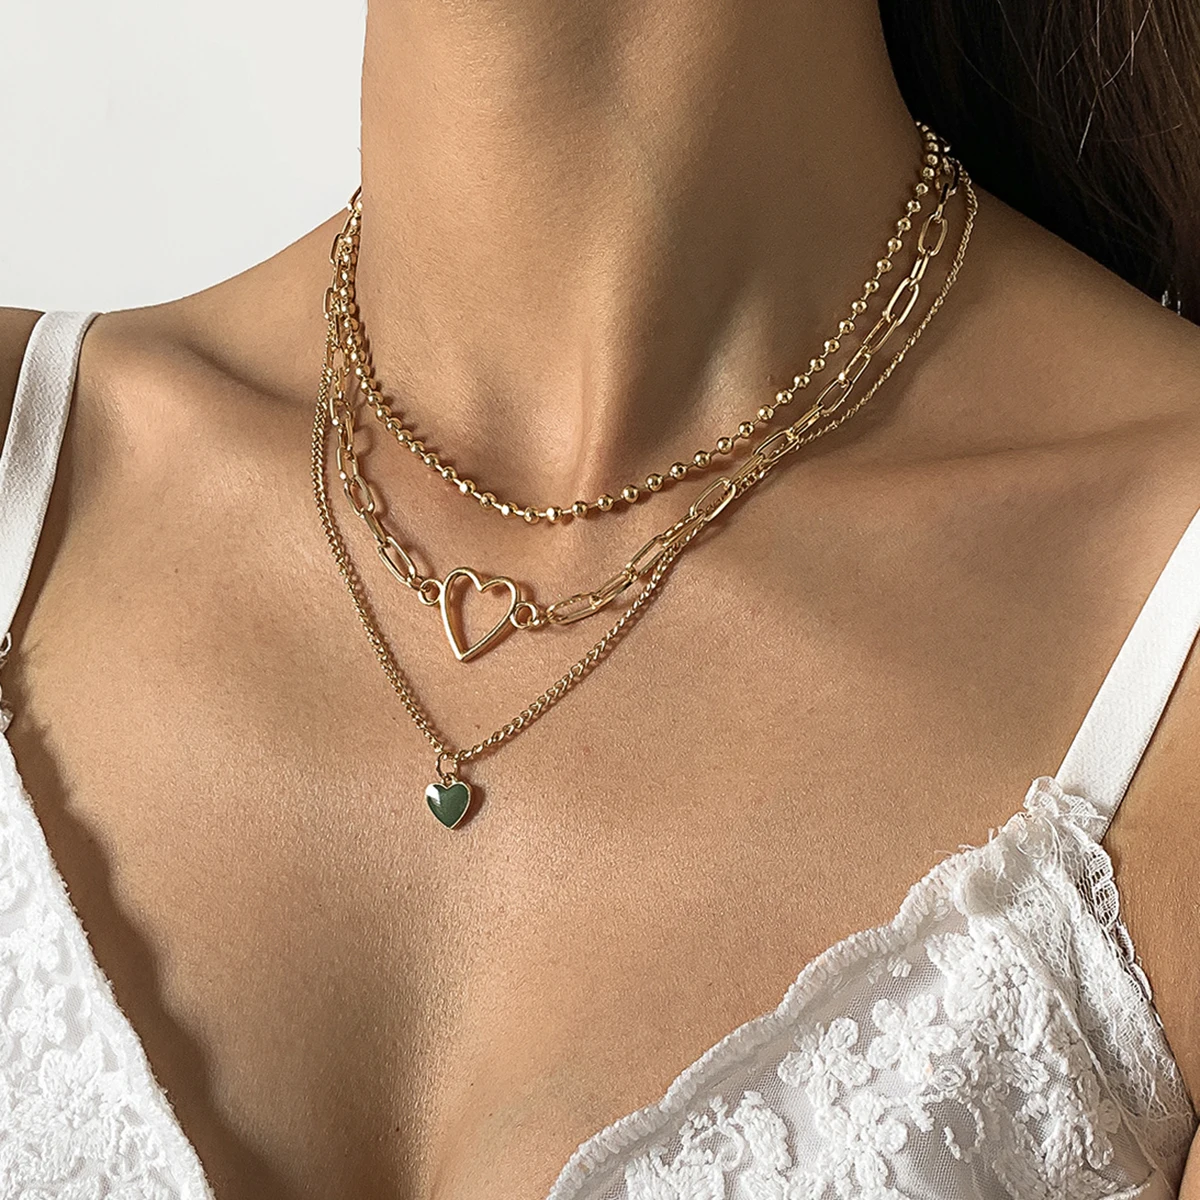 

SHIXIN Layered Short Heart Choker Necklace for Women Small Bead Chain Choker Necklaces Set 2021 Fashion Korean Necklaces Jewelry